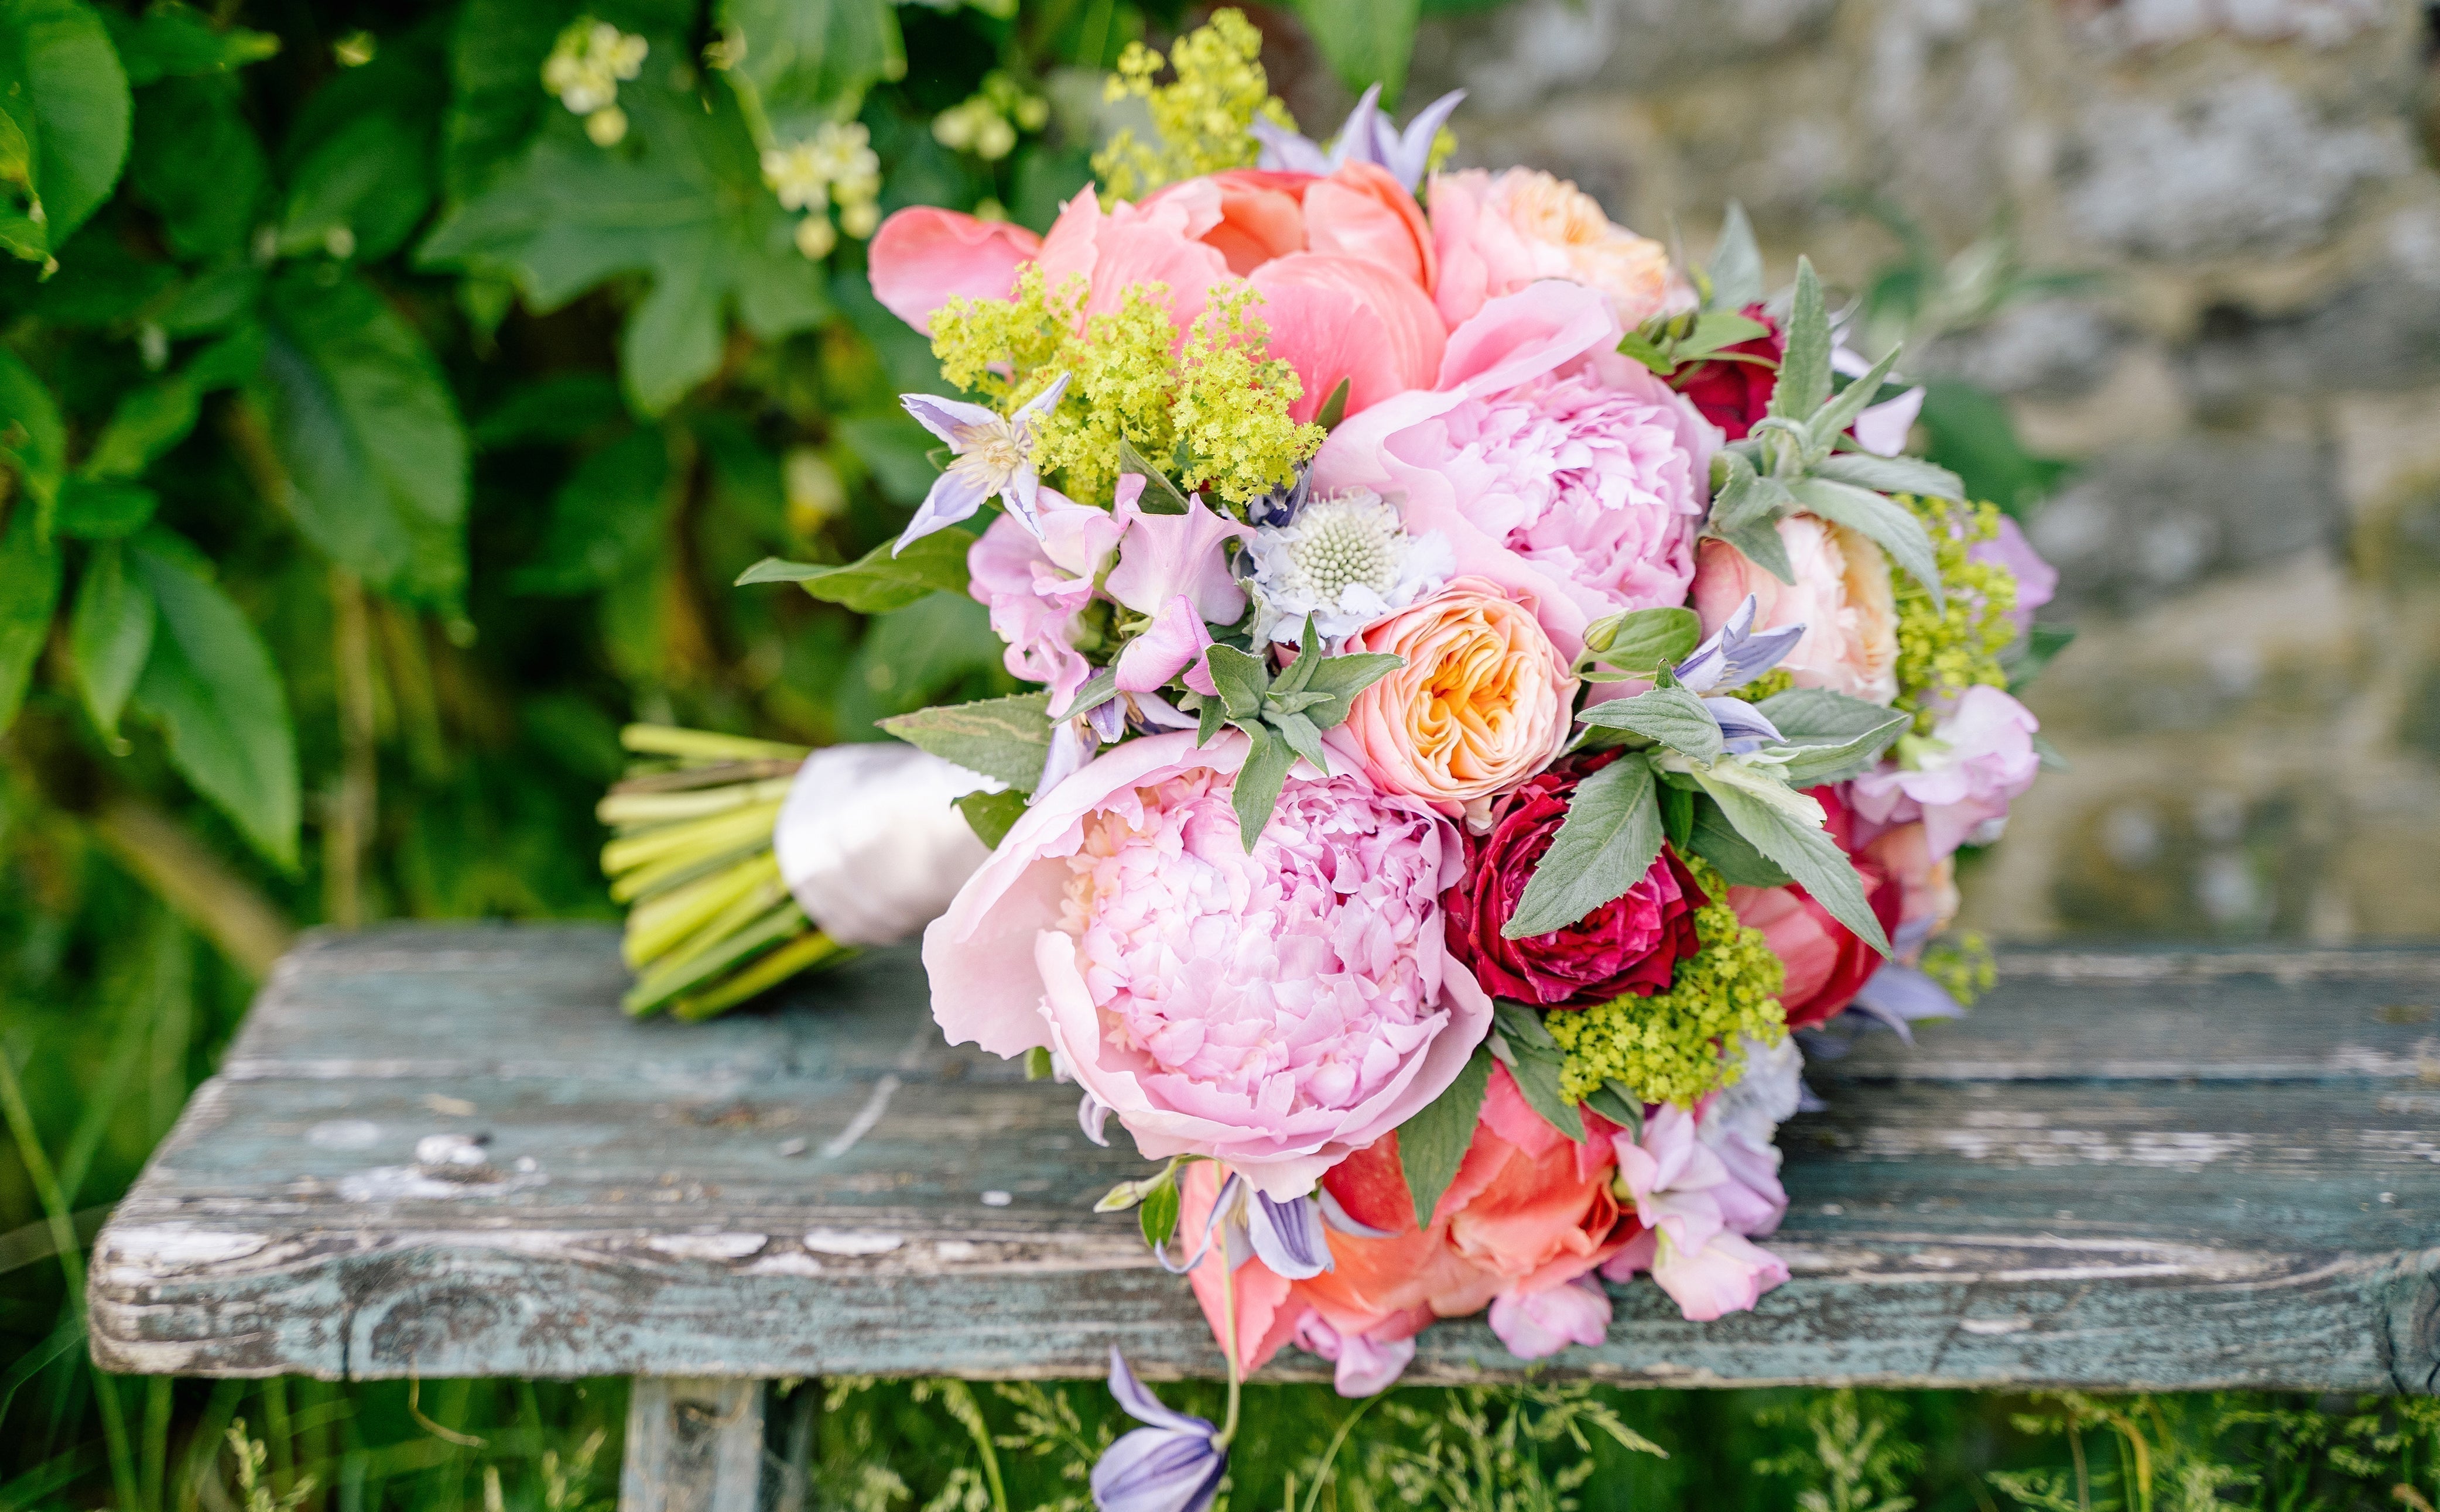 A Guide To Keeping Your Wedding Bouquet last longer